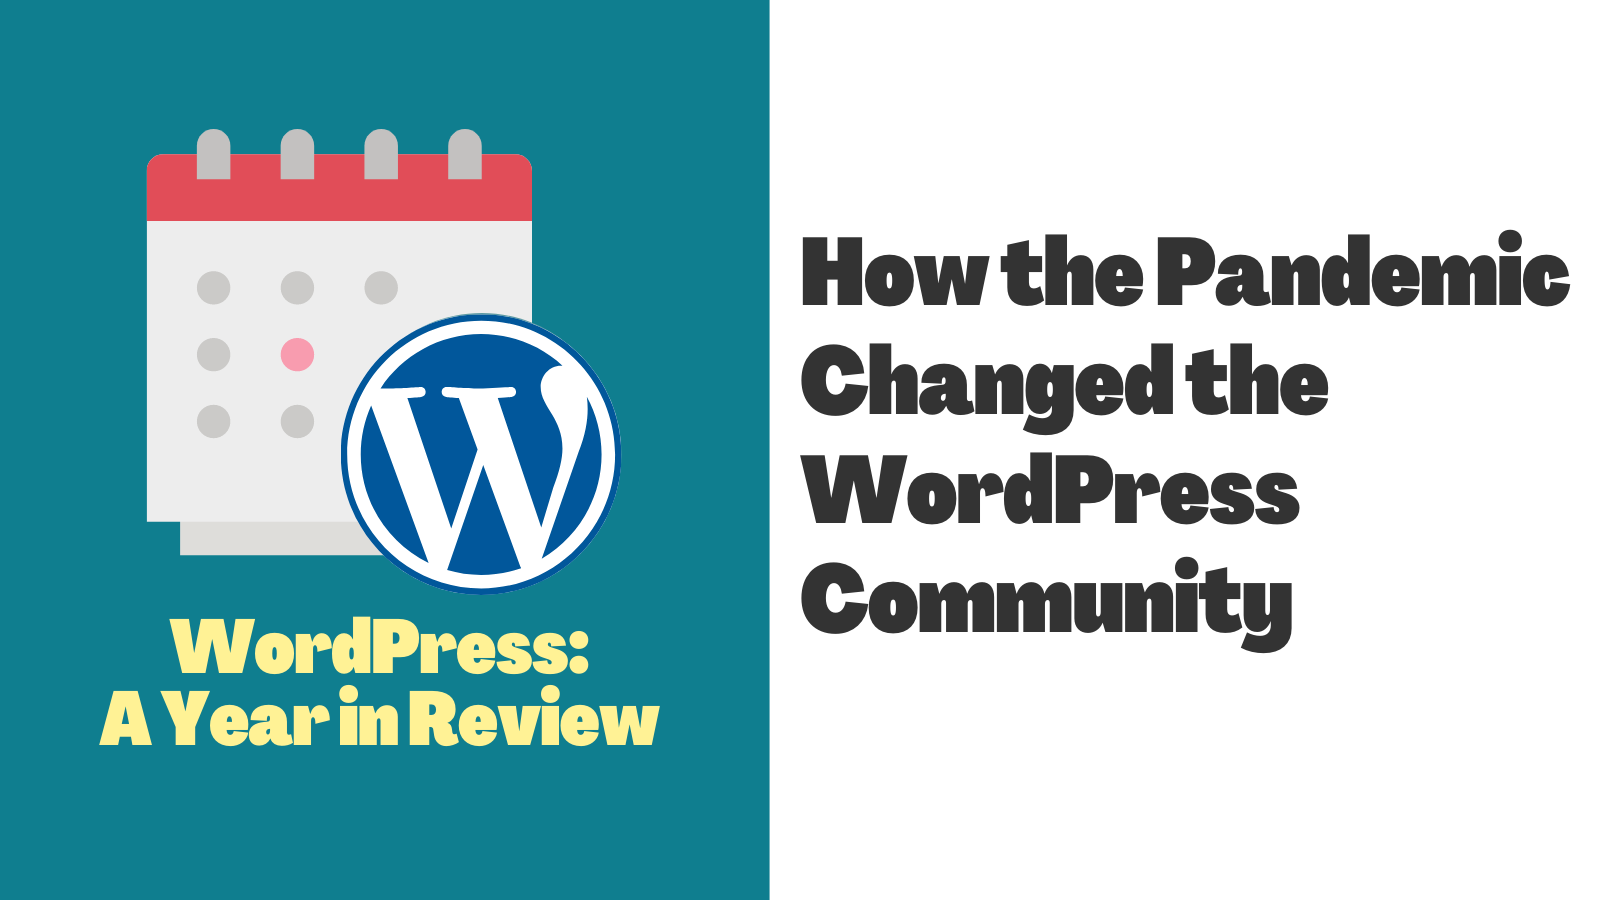 How the Pandemic Changed the WordPress Community